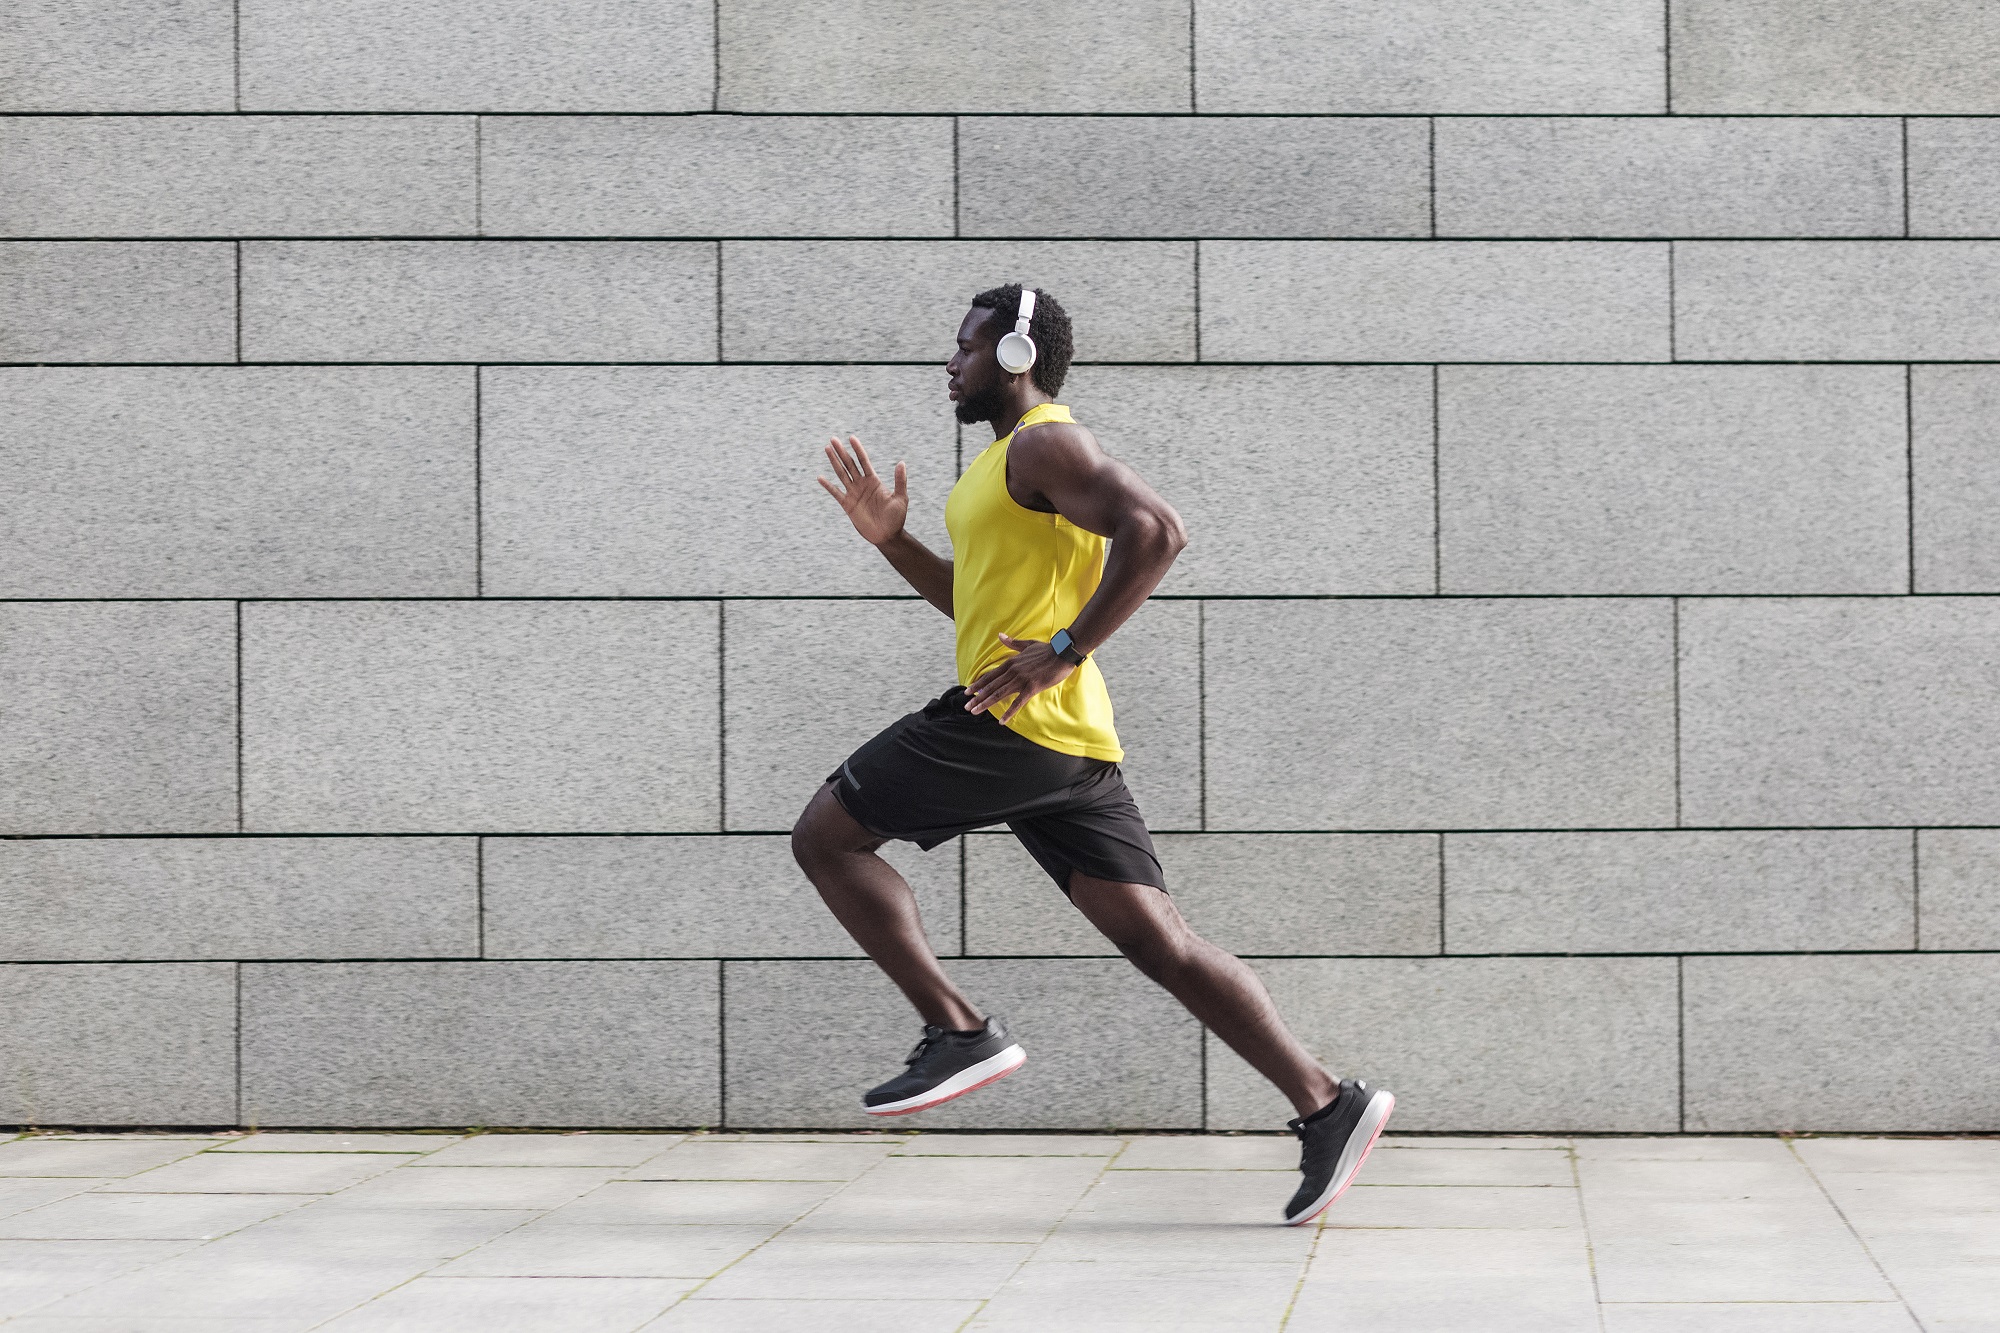 Man with headphones, yellow top and black shorts running down street